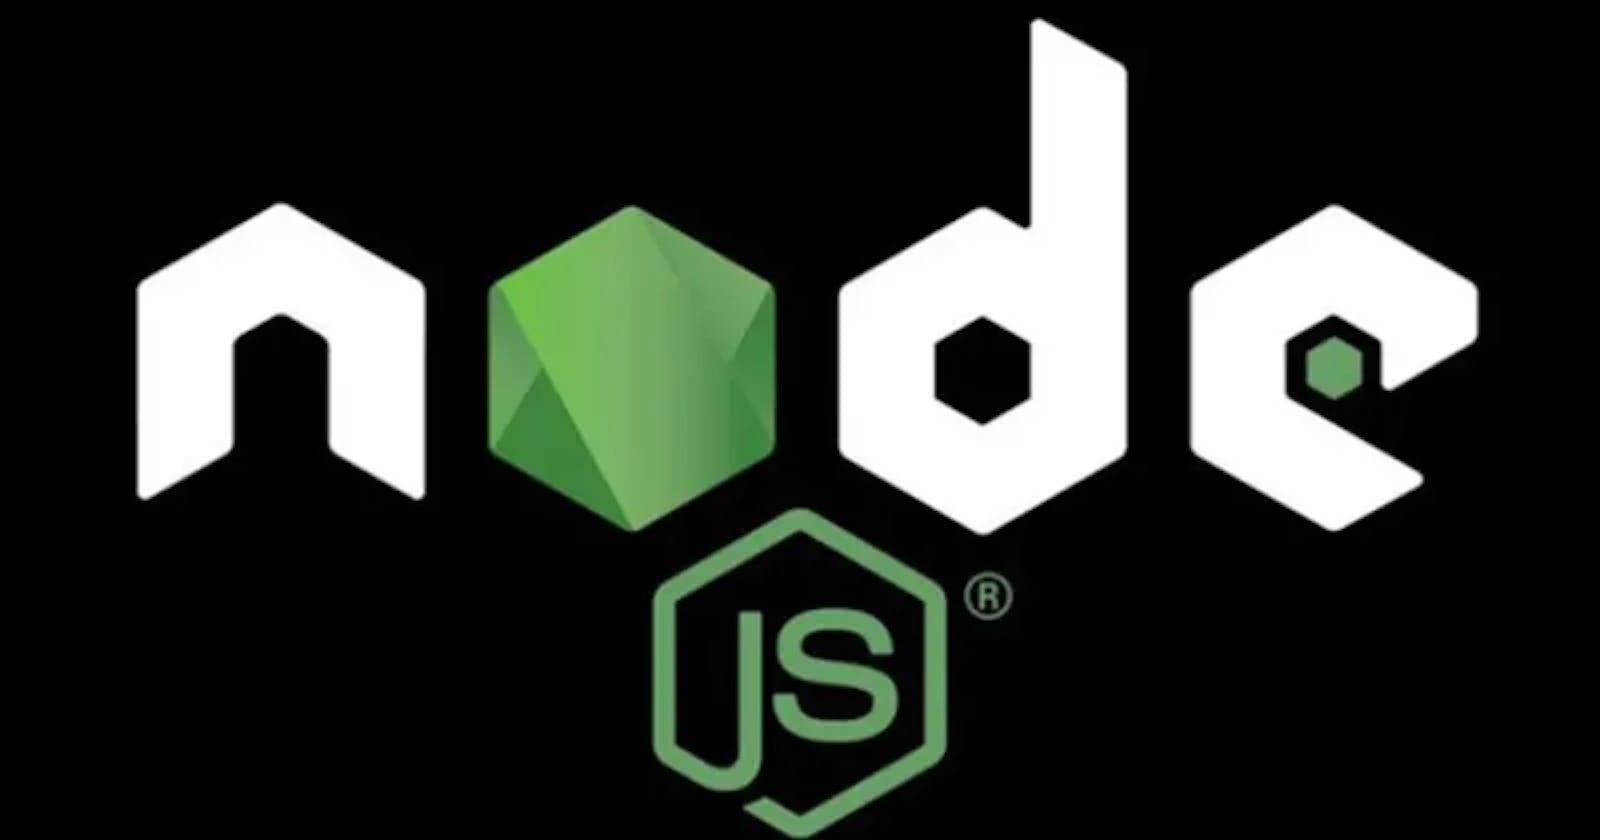 How to Initialize a Server on Node.js